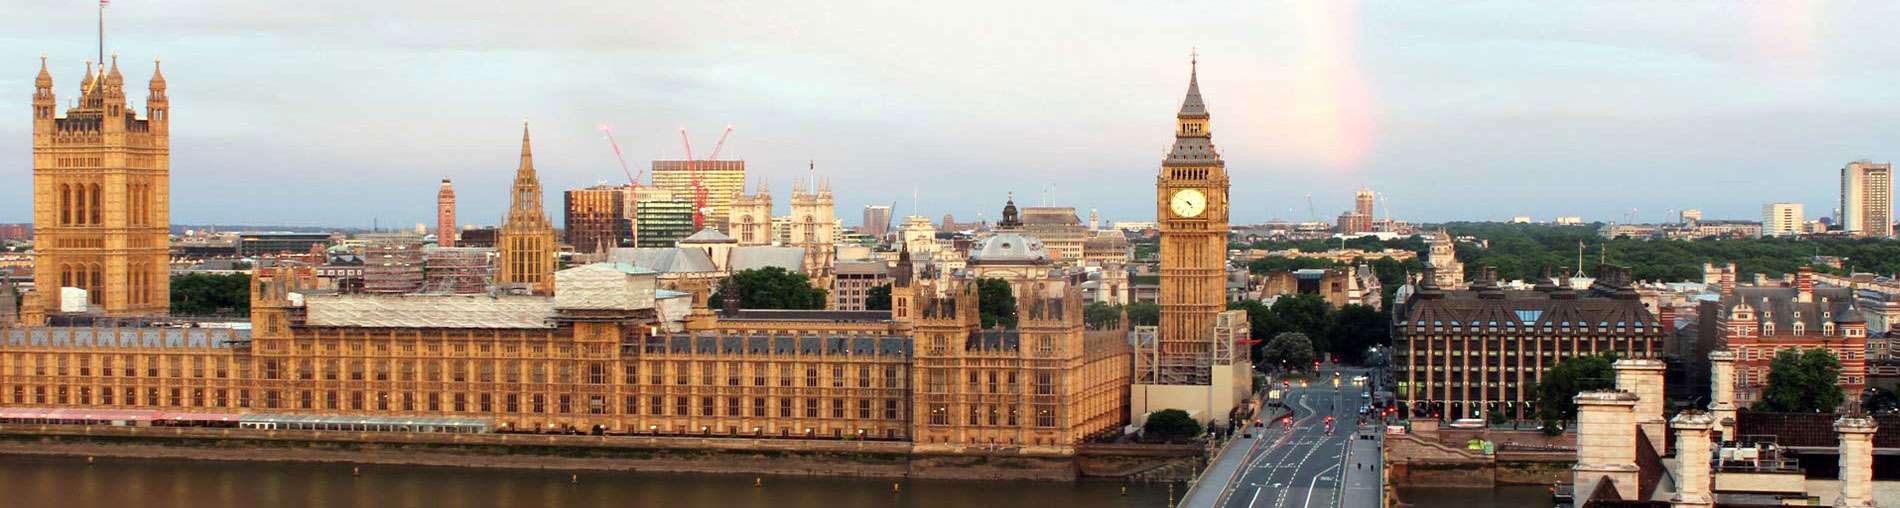 United Kingdom Delights Package - 7 Nights